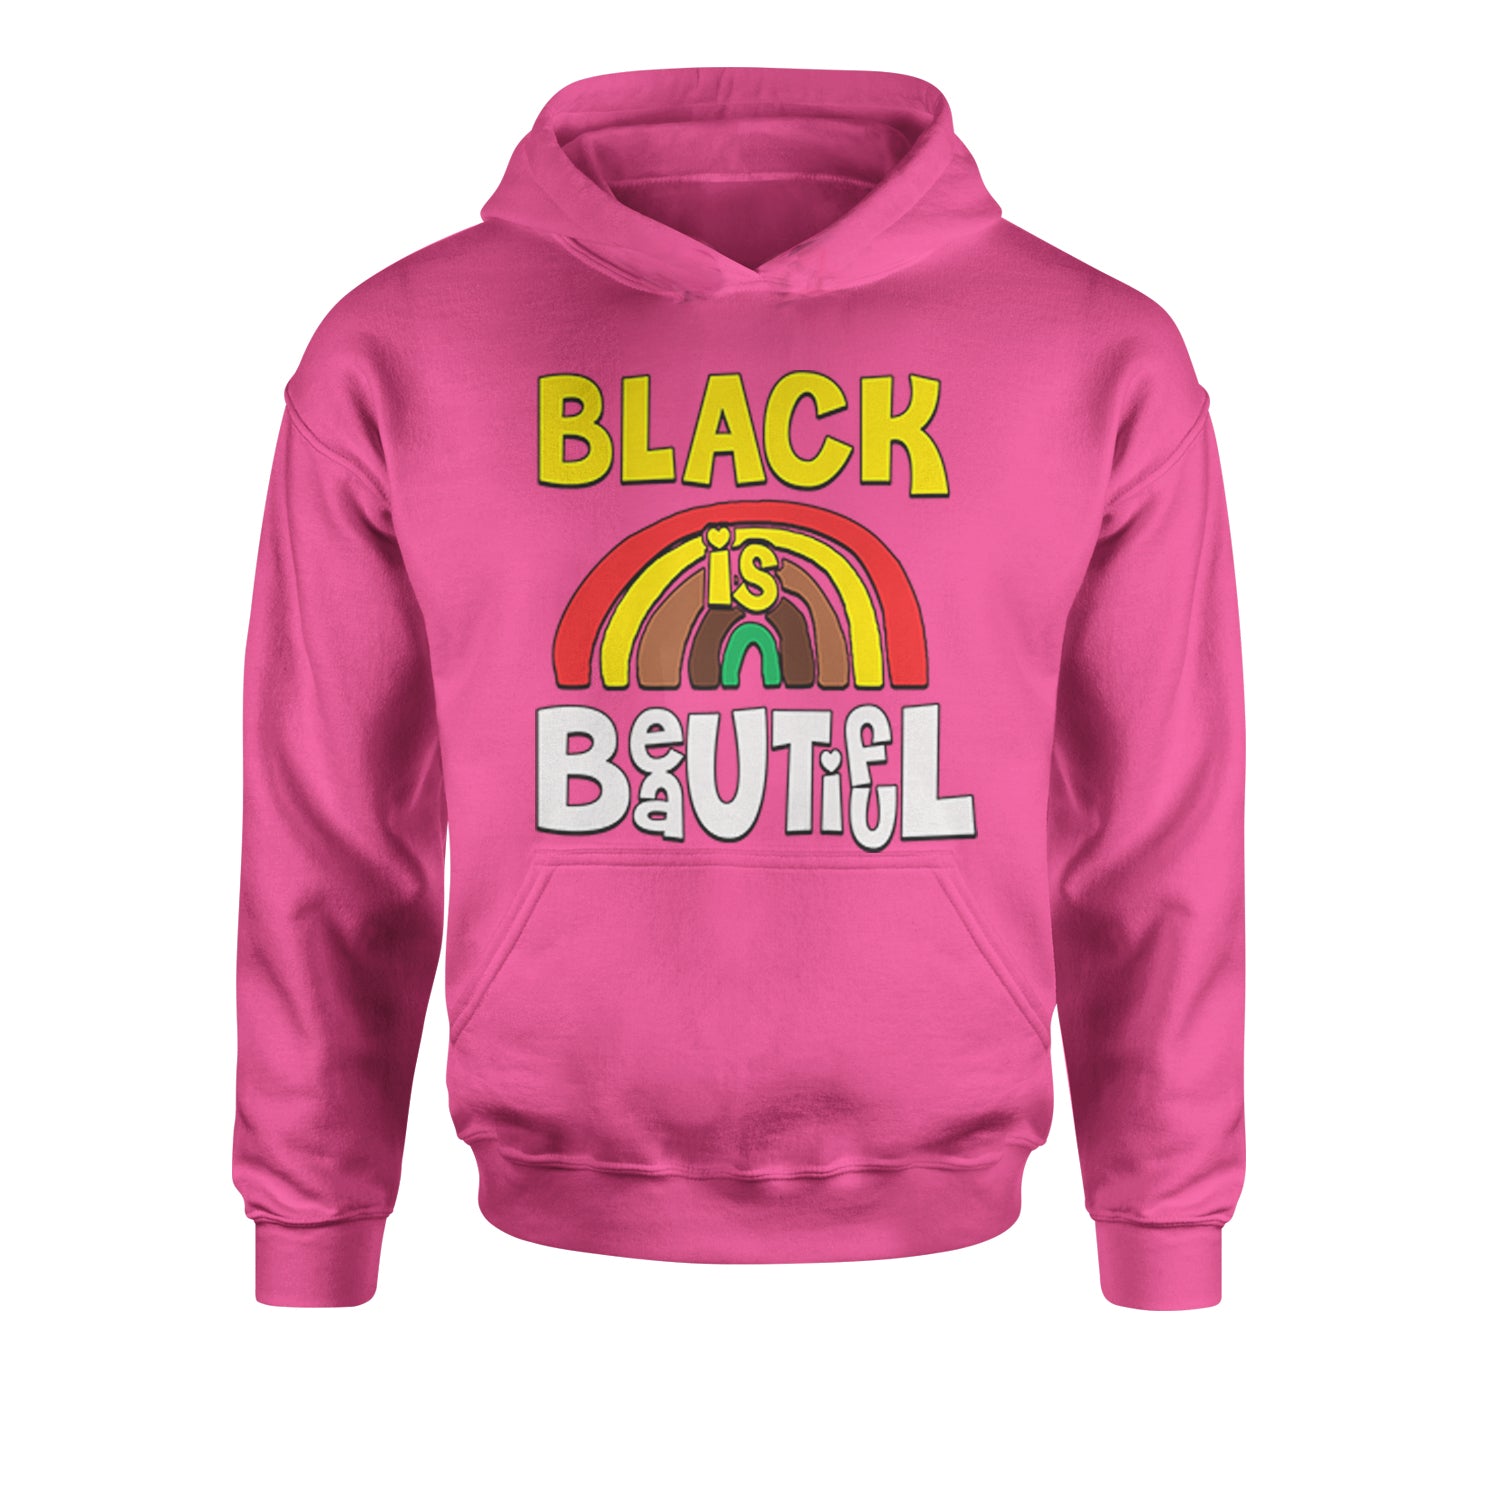 Black Is Beautiful Rainbow Youth-Sized Hoodie african, africanamerican, american, black, blackpride, blm, harriet, king, lives, luther, malcolm, march, martin, matter, parks, protest, rosa, tubman, x by Expression Tees